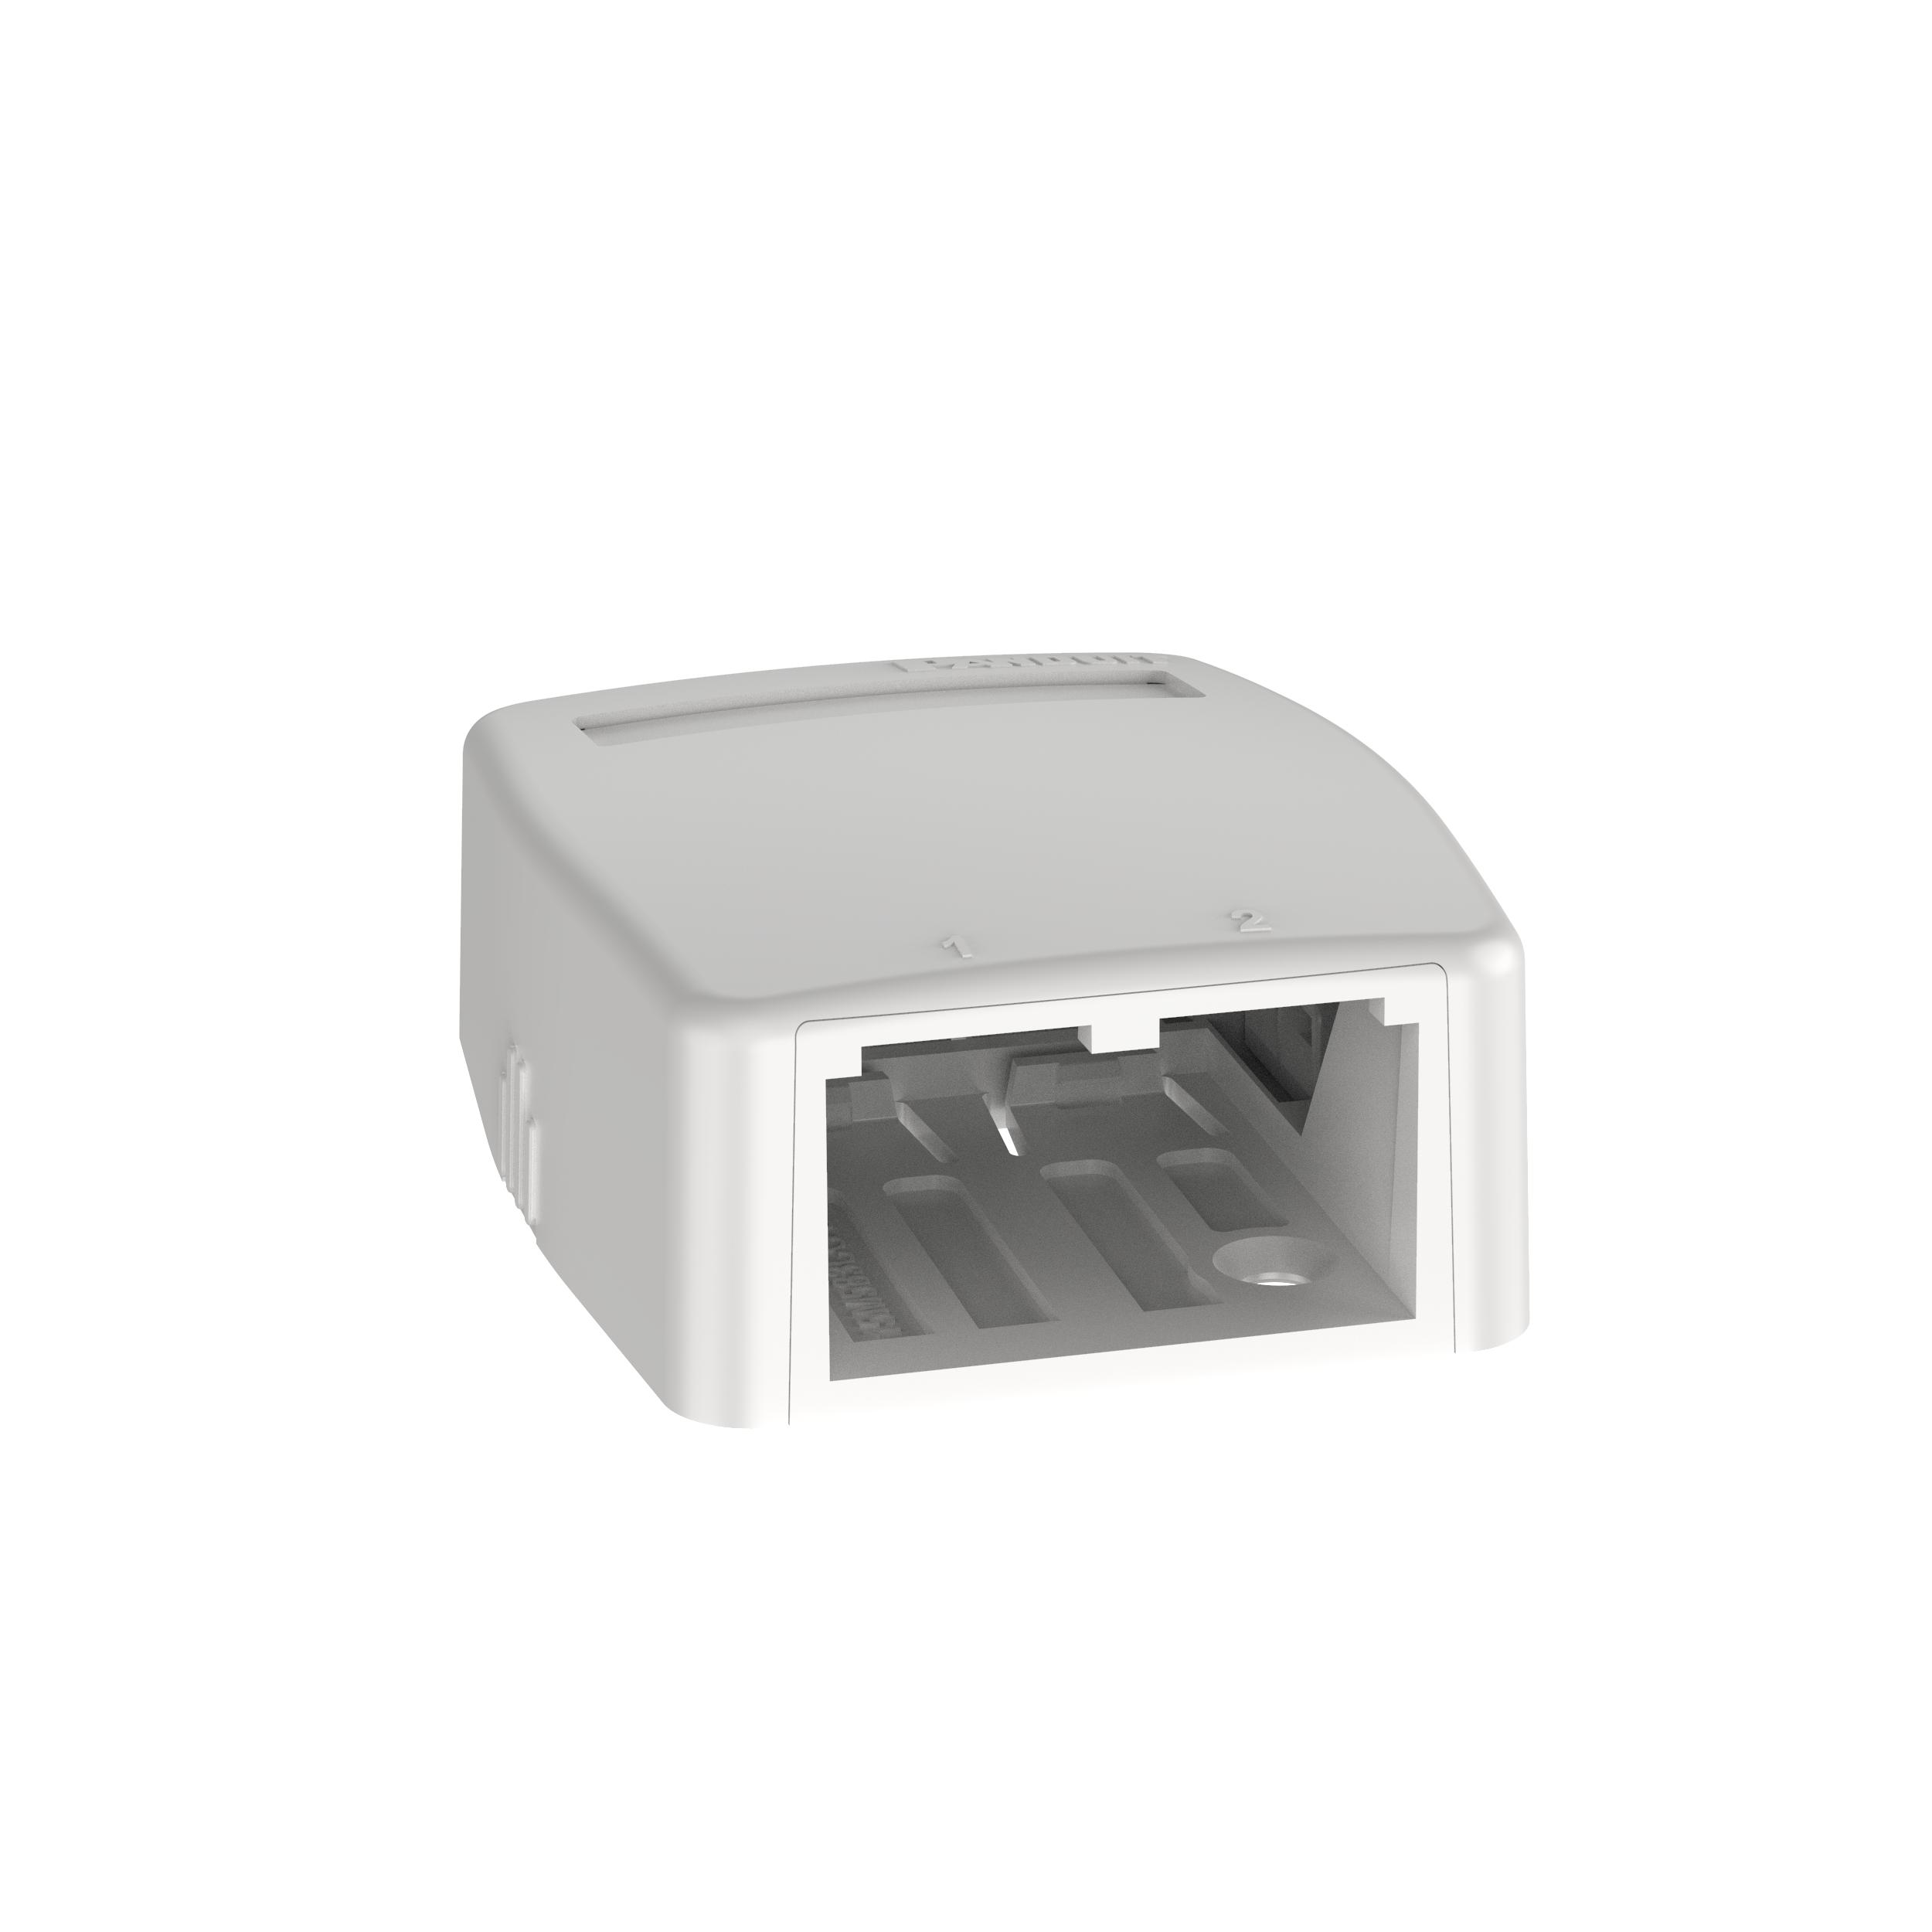 Panduit CBXQ2WH-A SURFACE MNT BOX 2-PORT MINICOMW/ QUICK RELEASE COVER ANDADHESIVE, WHITE